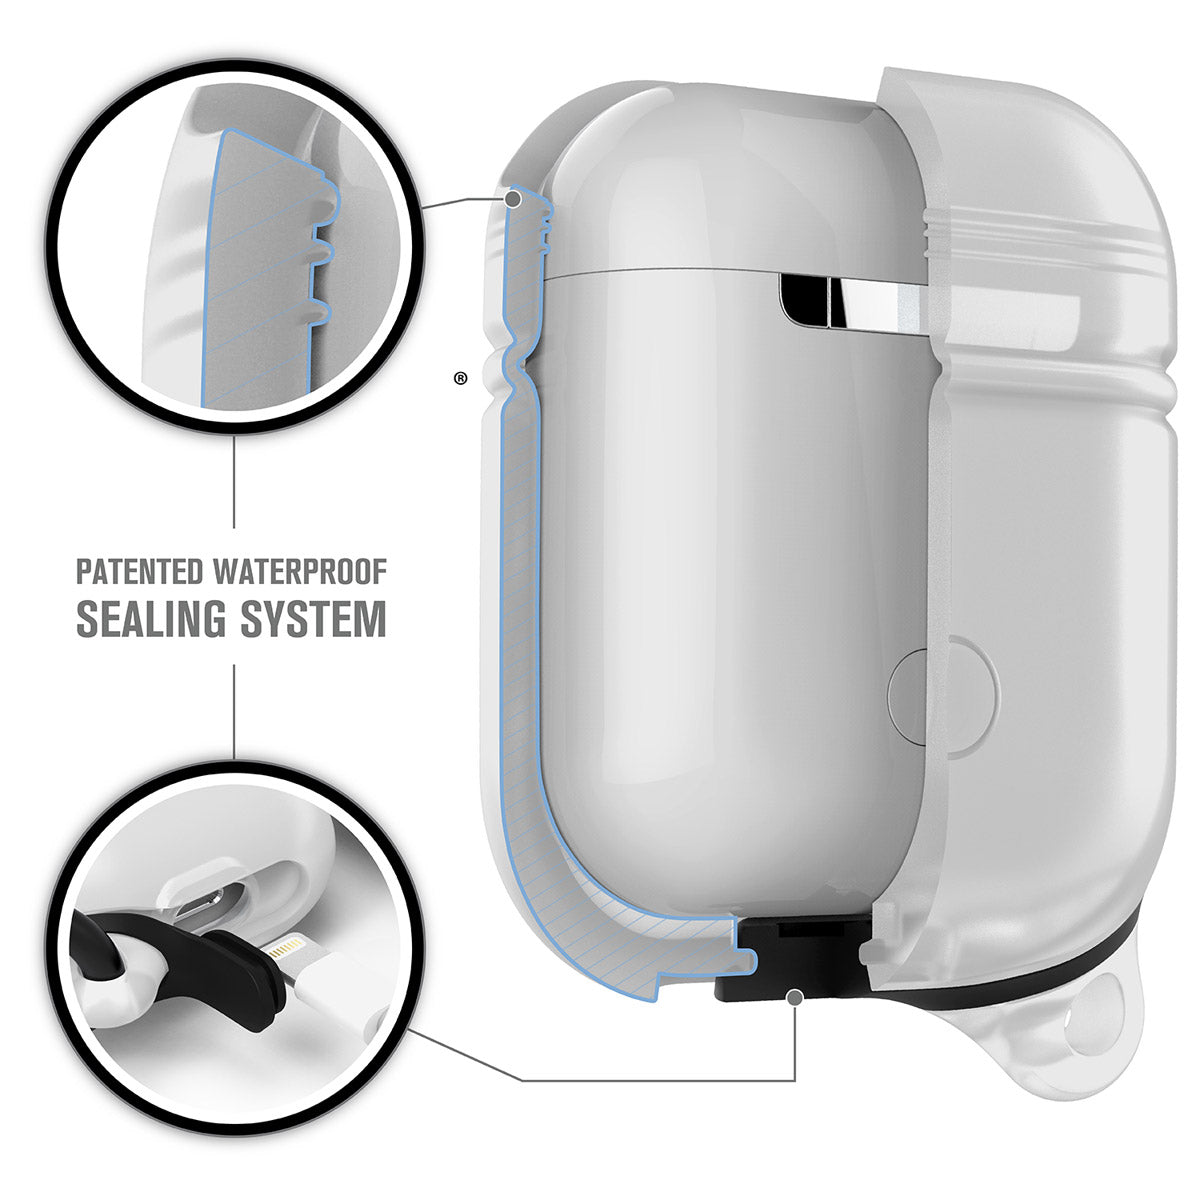 CATAPDWHT-FBA | Catalyst airpods gen2/1 waterproof case + carabiner showing the inner materials of the case in frost white text reads patented waterproof sealing system